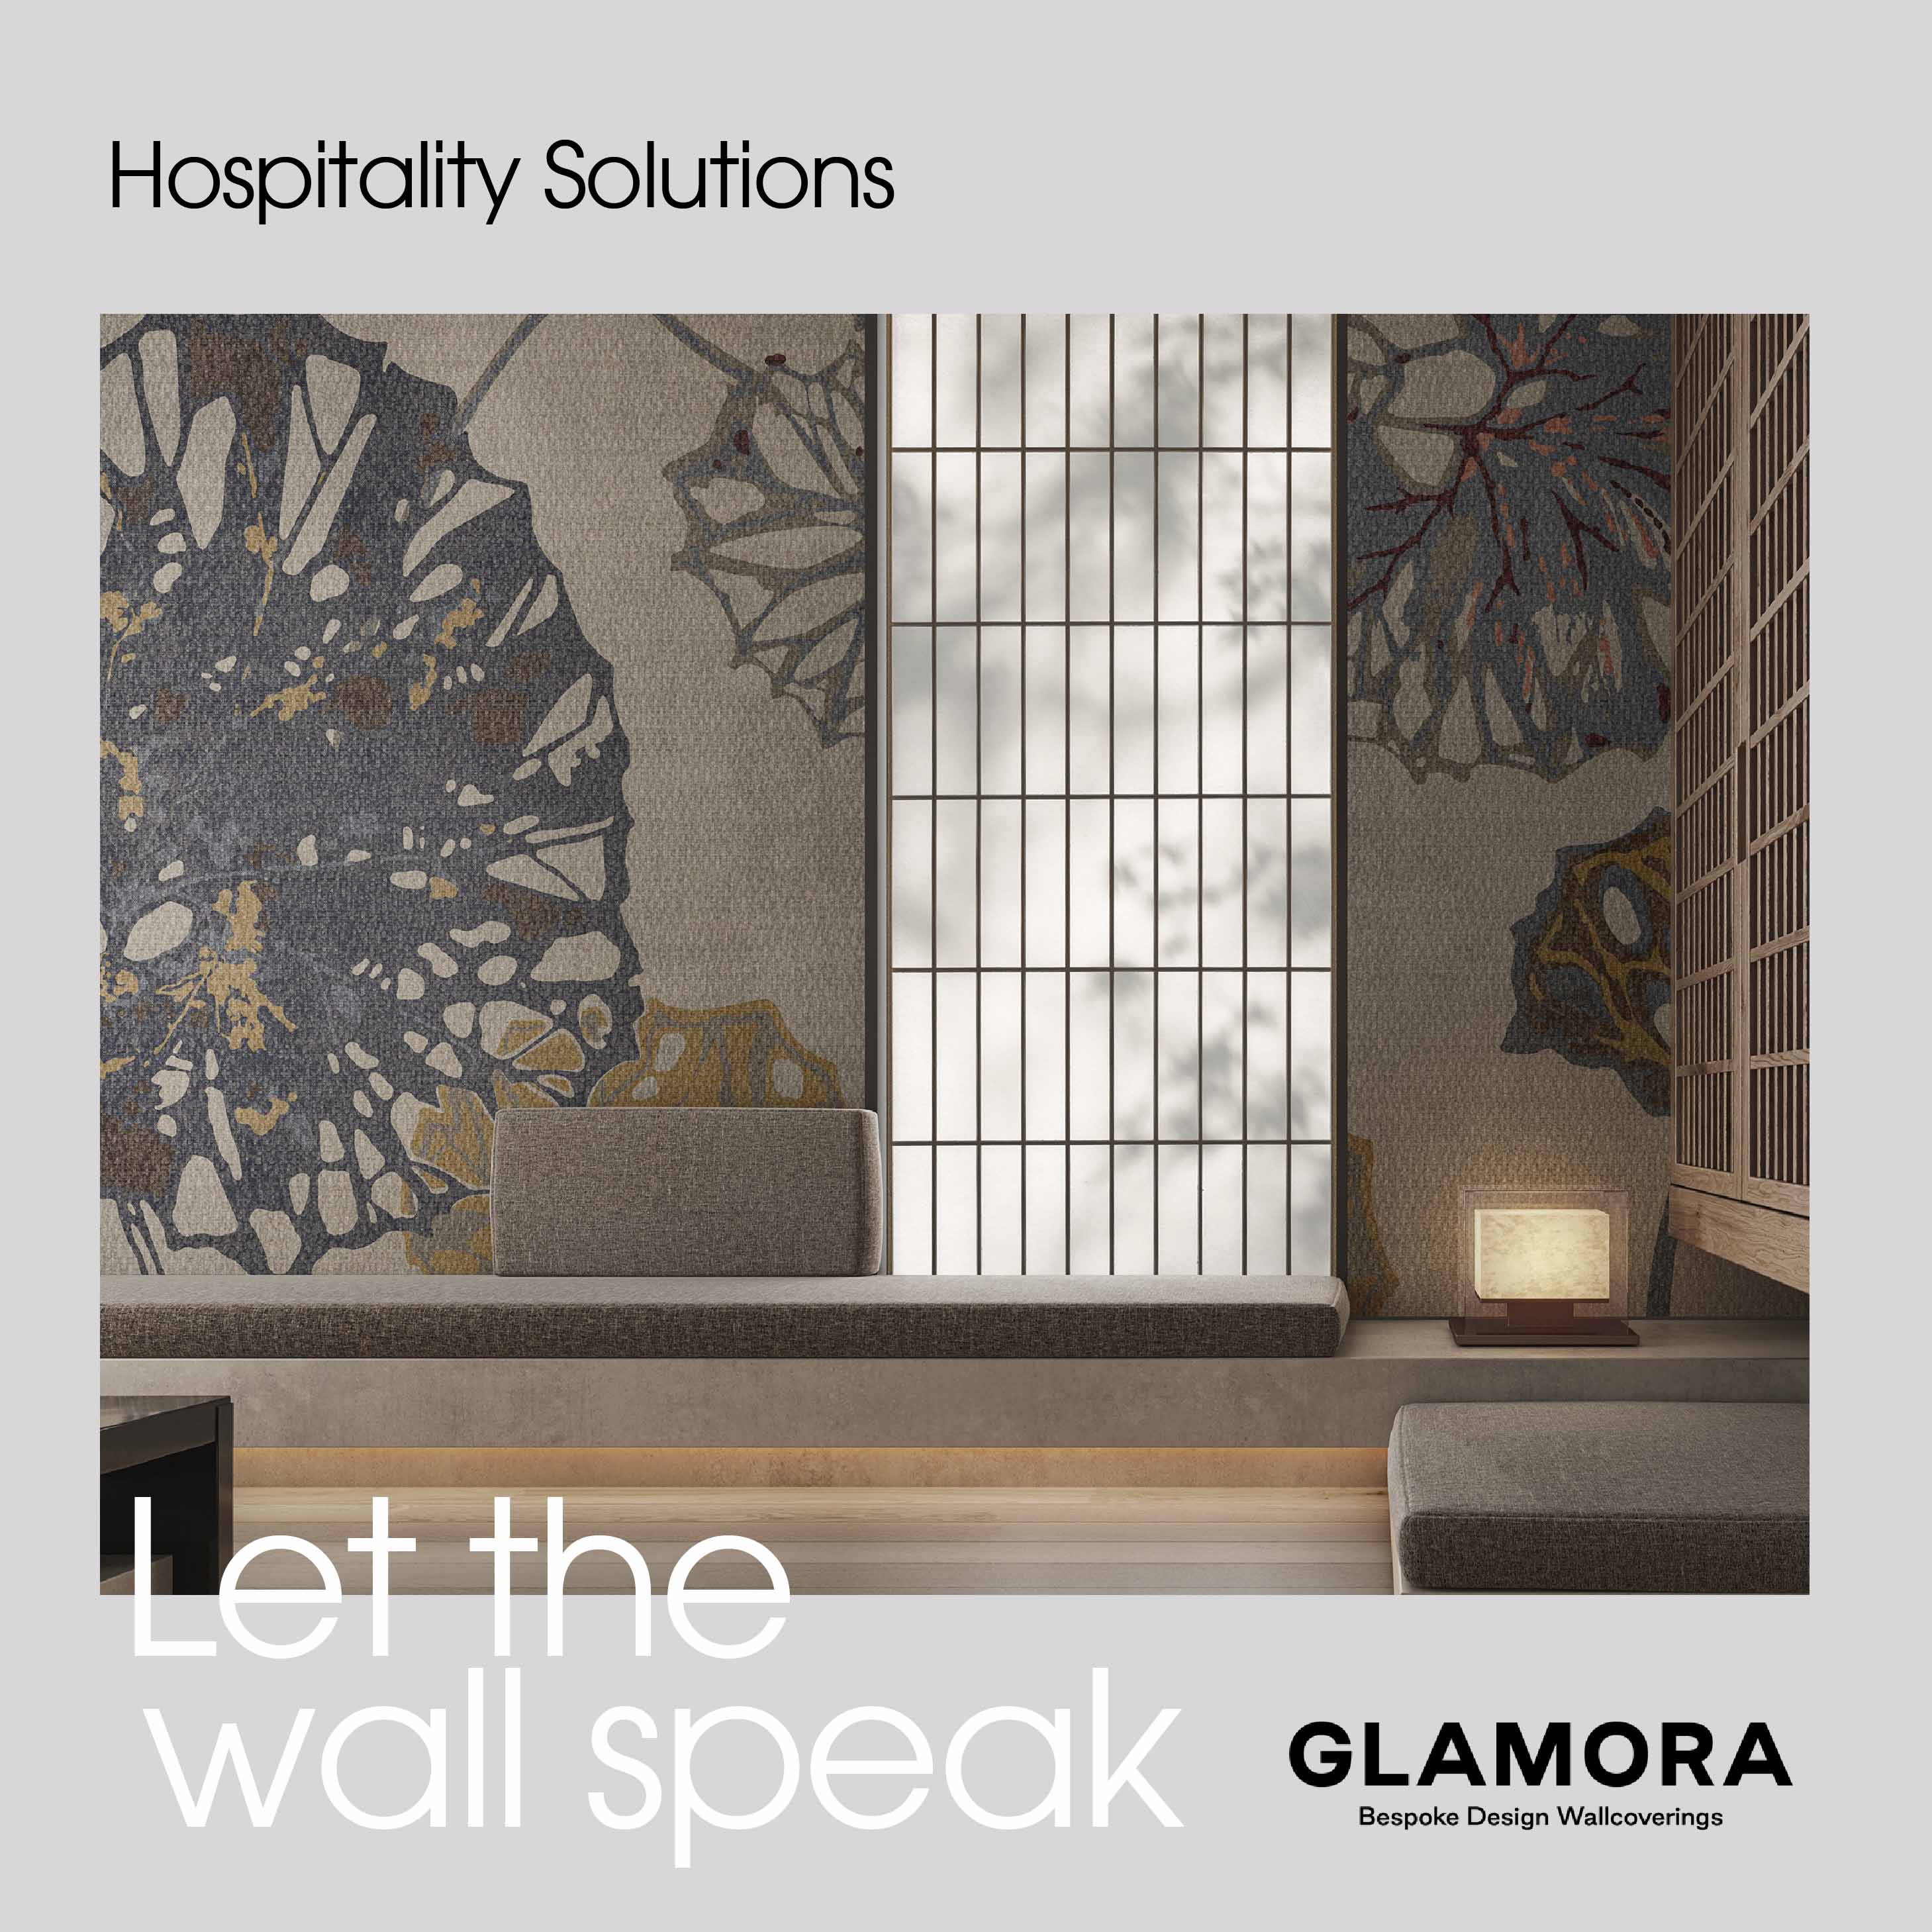 COLOURLIVING | Hospitality Solutions | Glamora’s high-performance wallcoverings